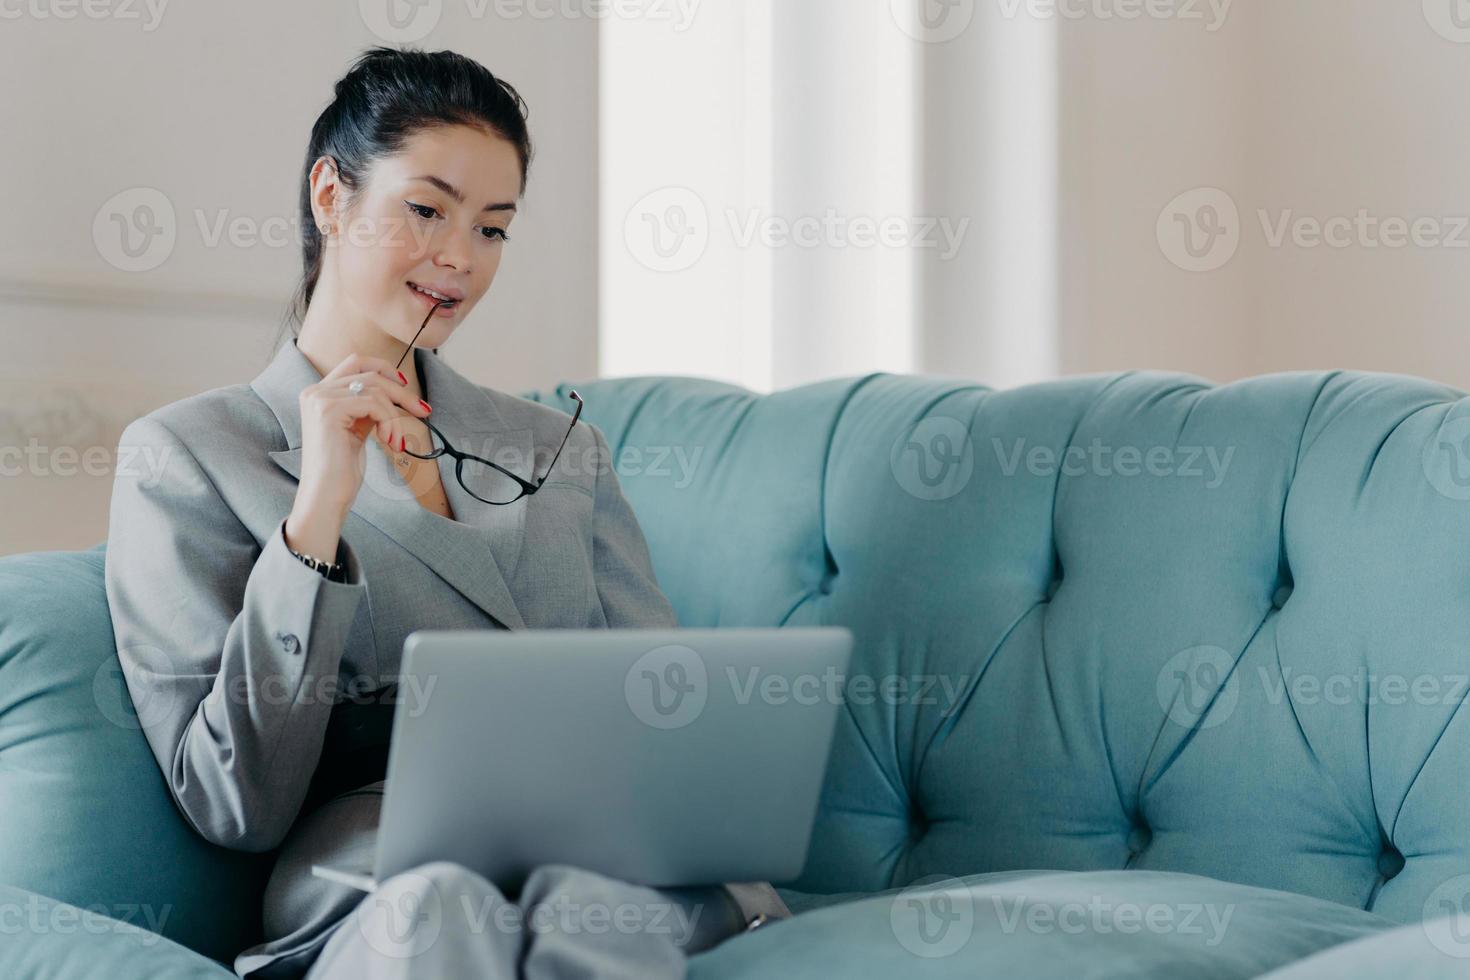 Serious woman entrepreneur takes off glasses, focused in laptop computer screen, analyzes statistics data, looks through financial information, works online, sits on sofa in coworking space. photo